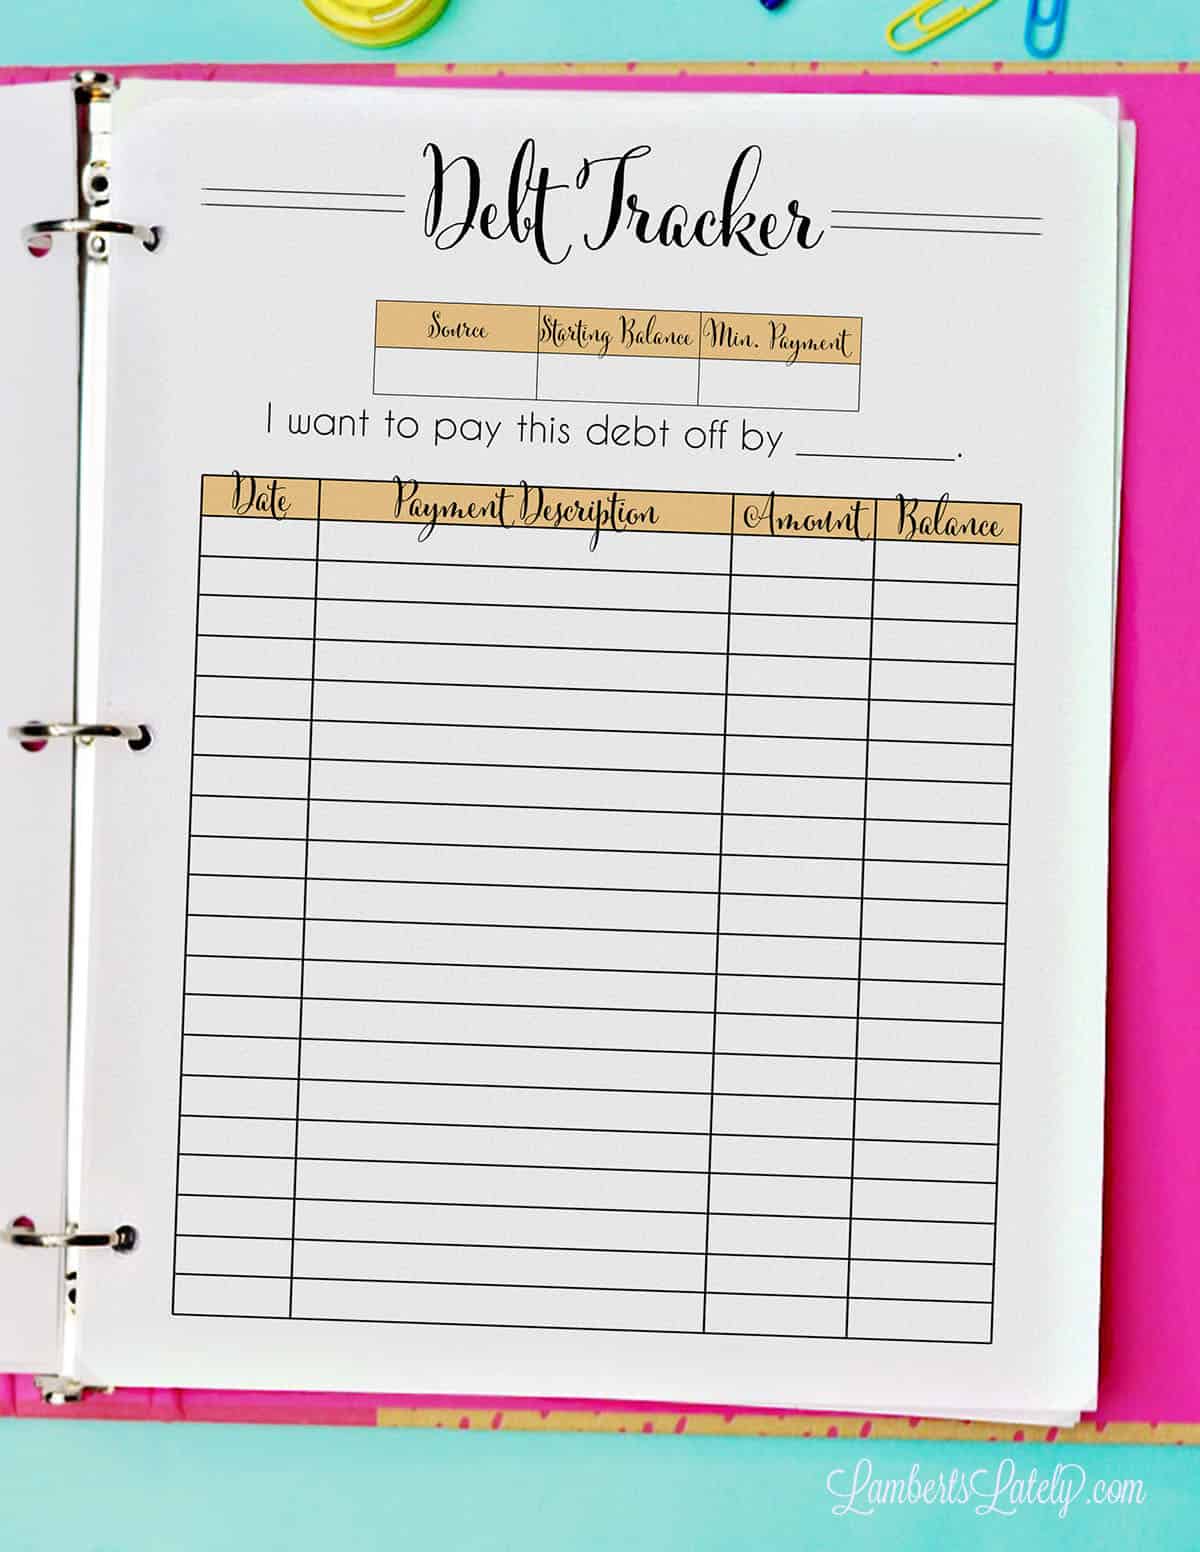 debt tracker page in a 3 ring binder.